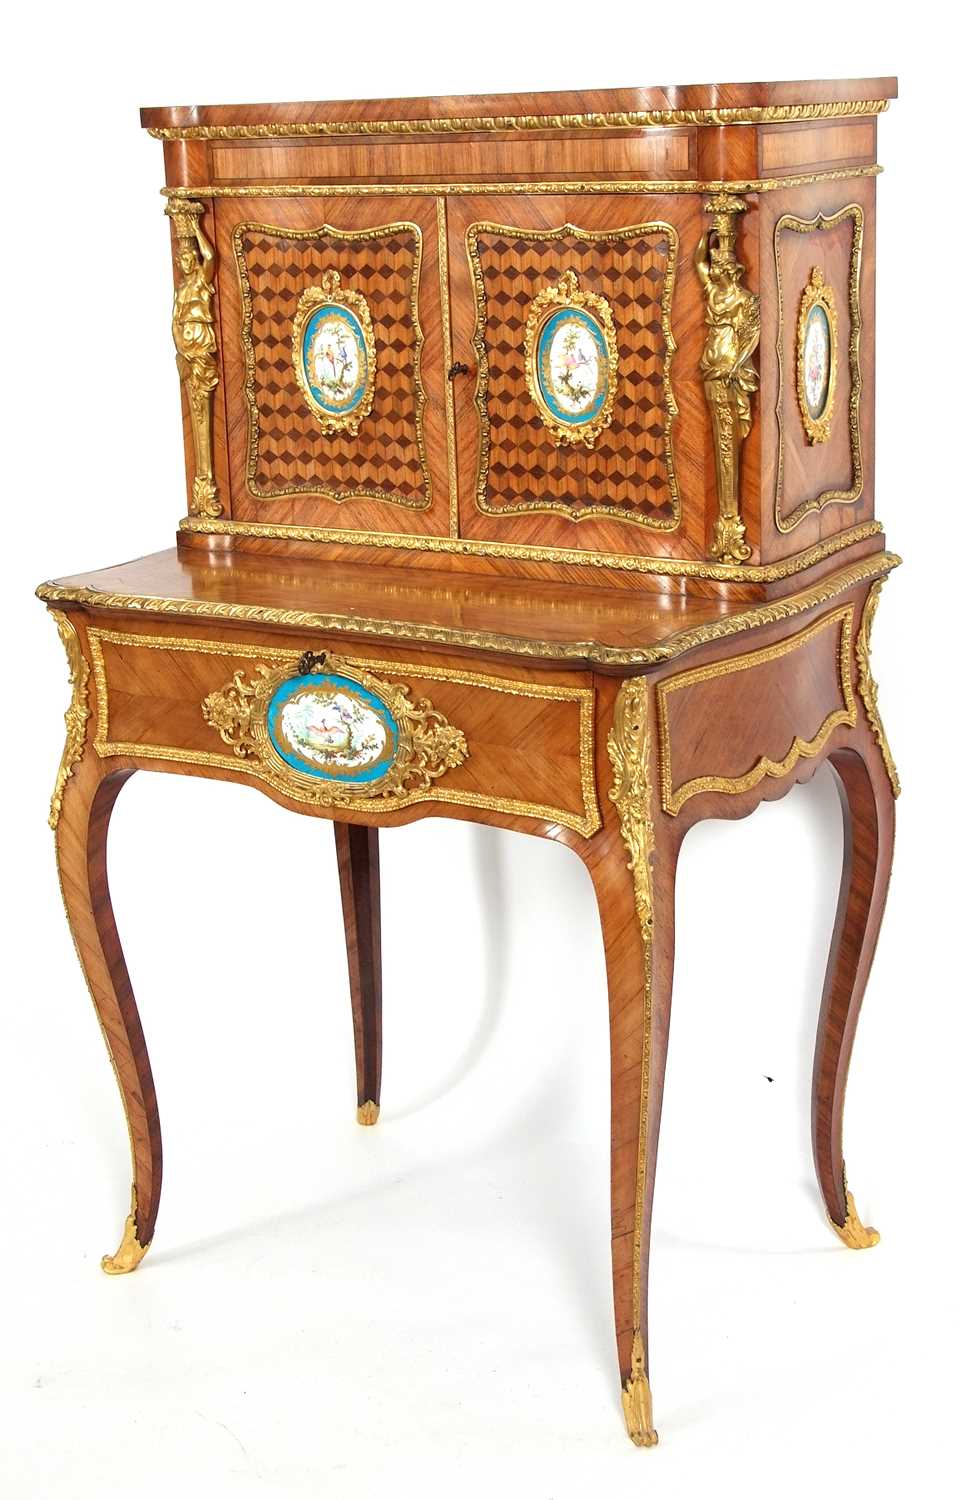 A French walnut porcelain and ormolu desk with two panelled doors to the top over a base with single - Image 8 of 16